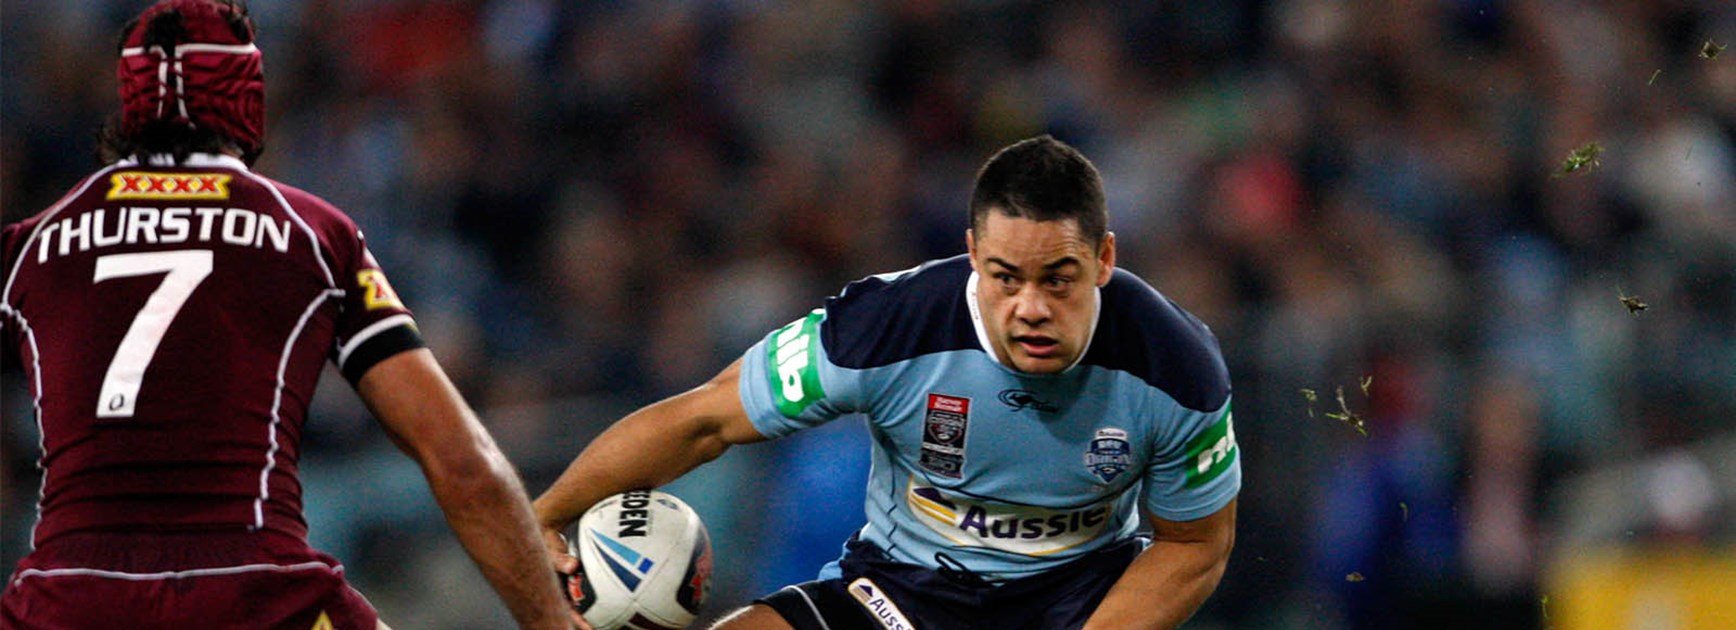 Jarryd Hayne and Johnathan Thurston are set to reignite their rivalry when the Cowboys host the Titans.